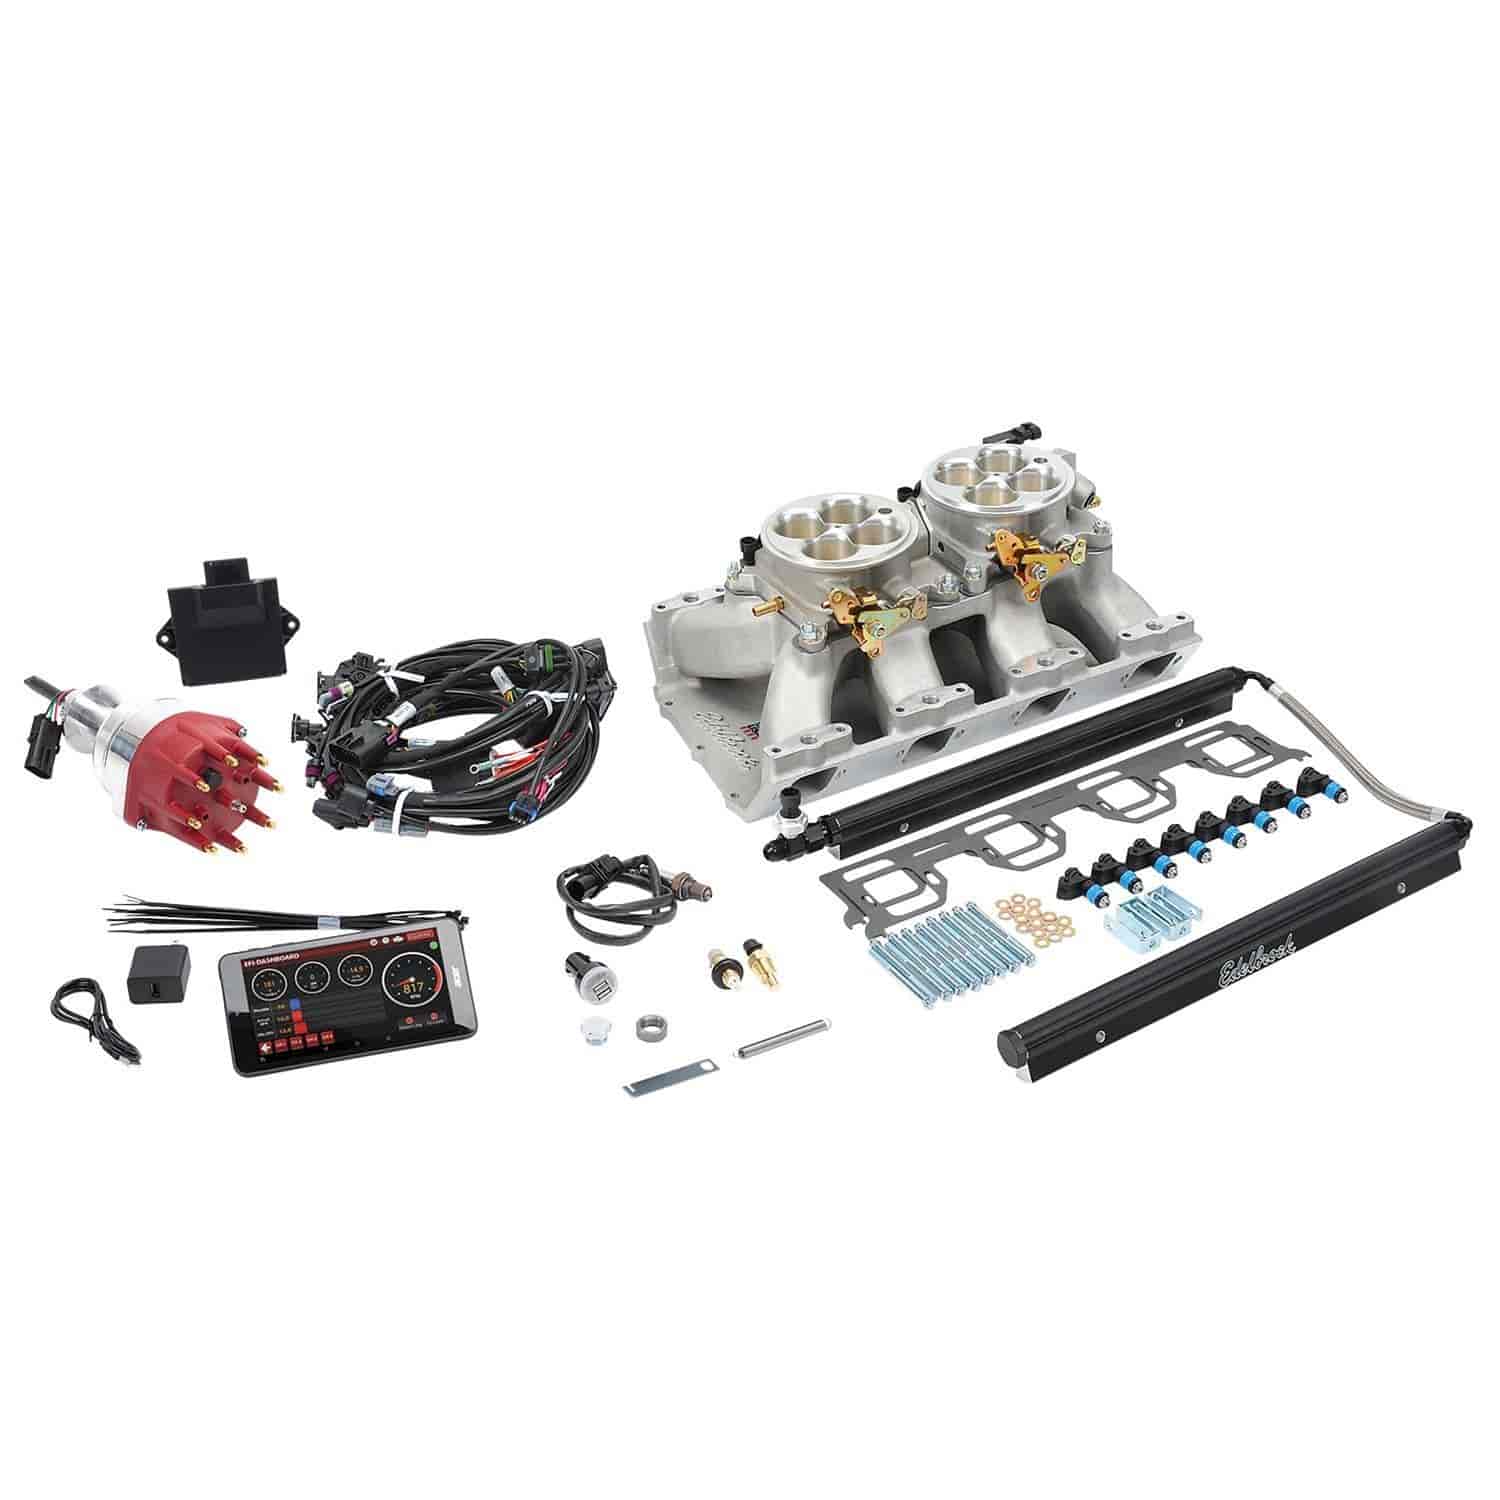 PF4 FUEL INJECTION KIT DL